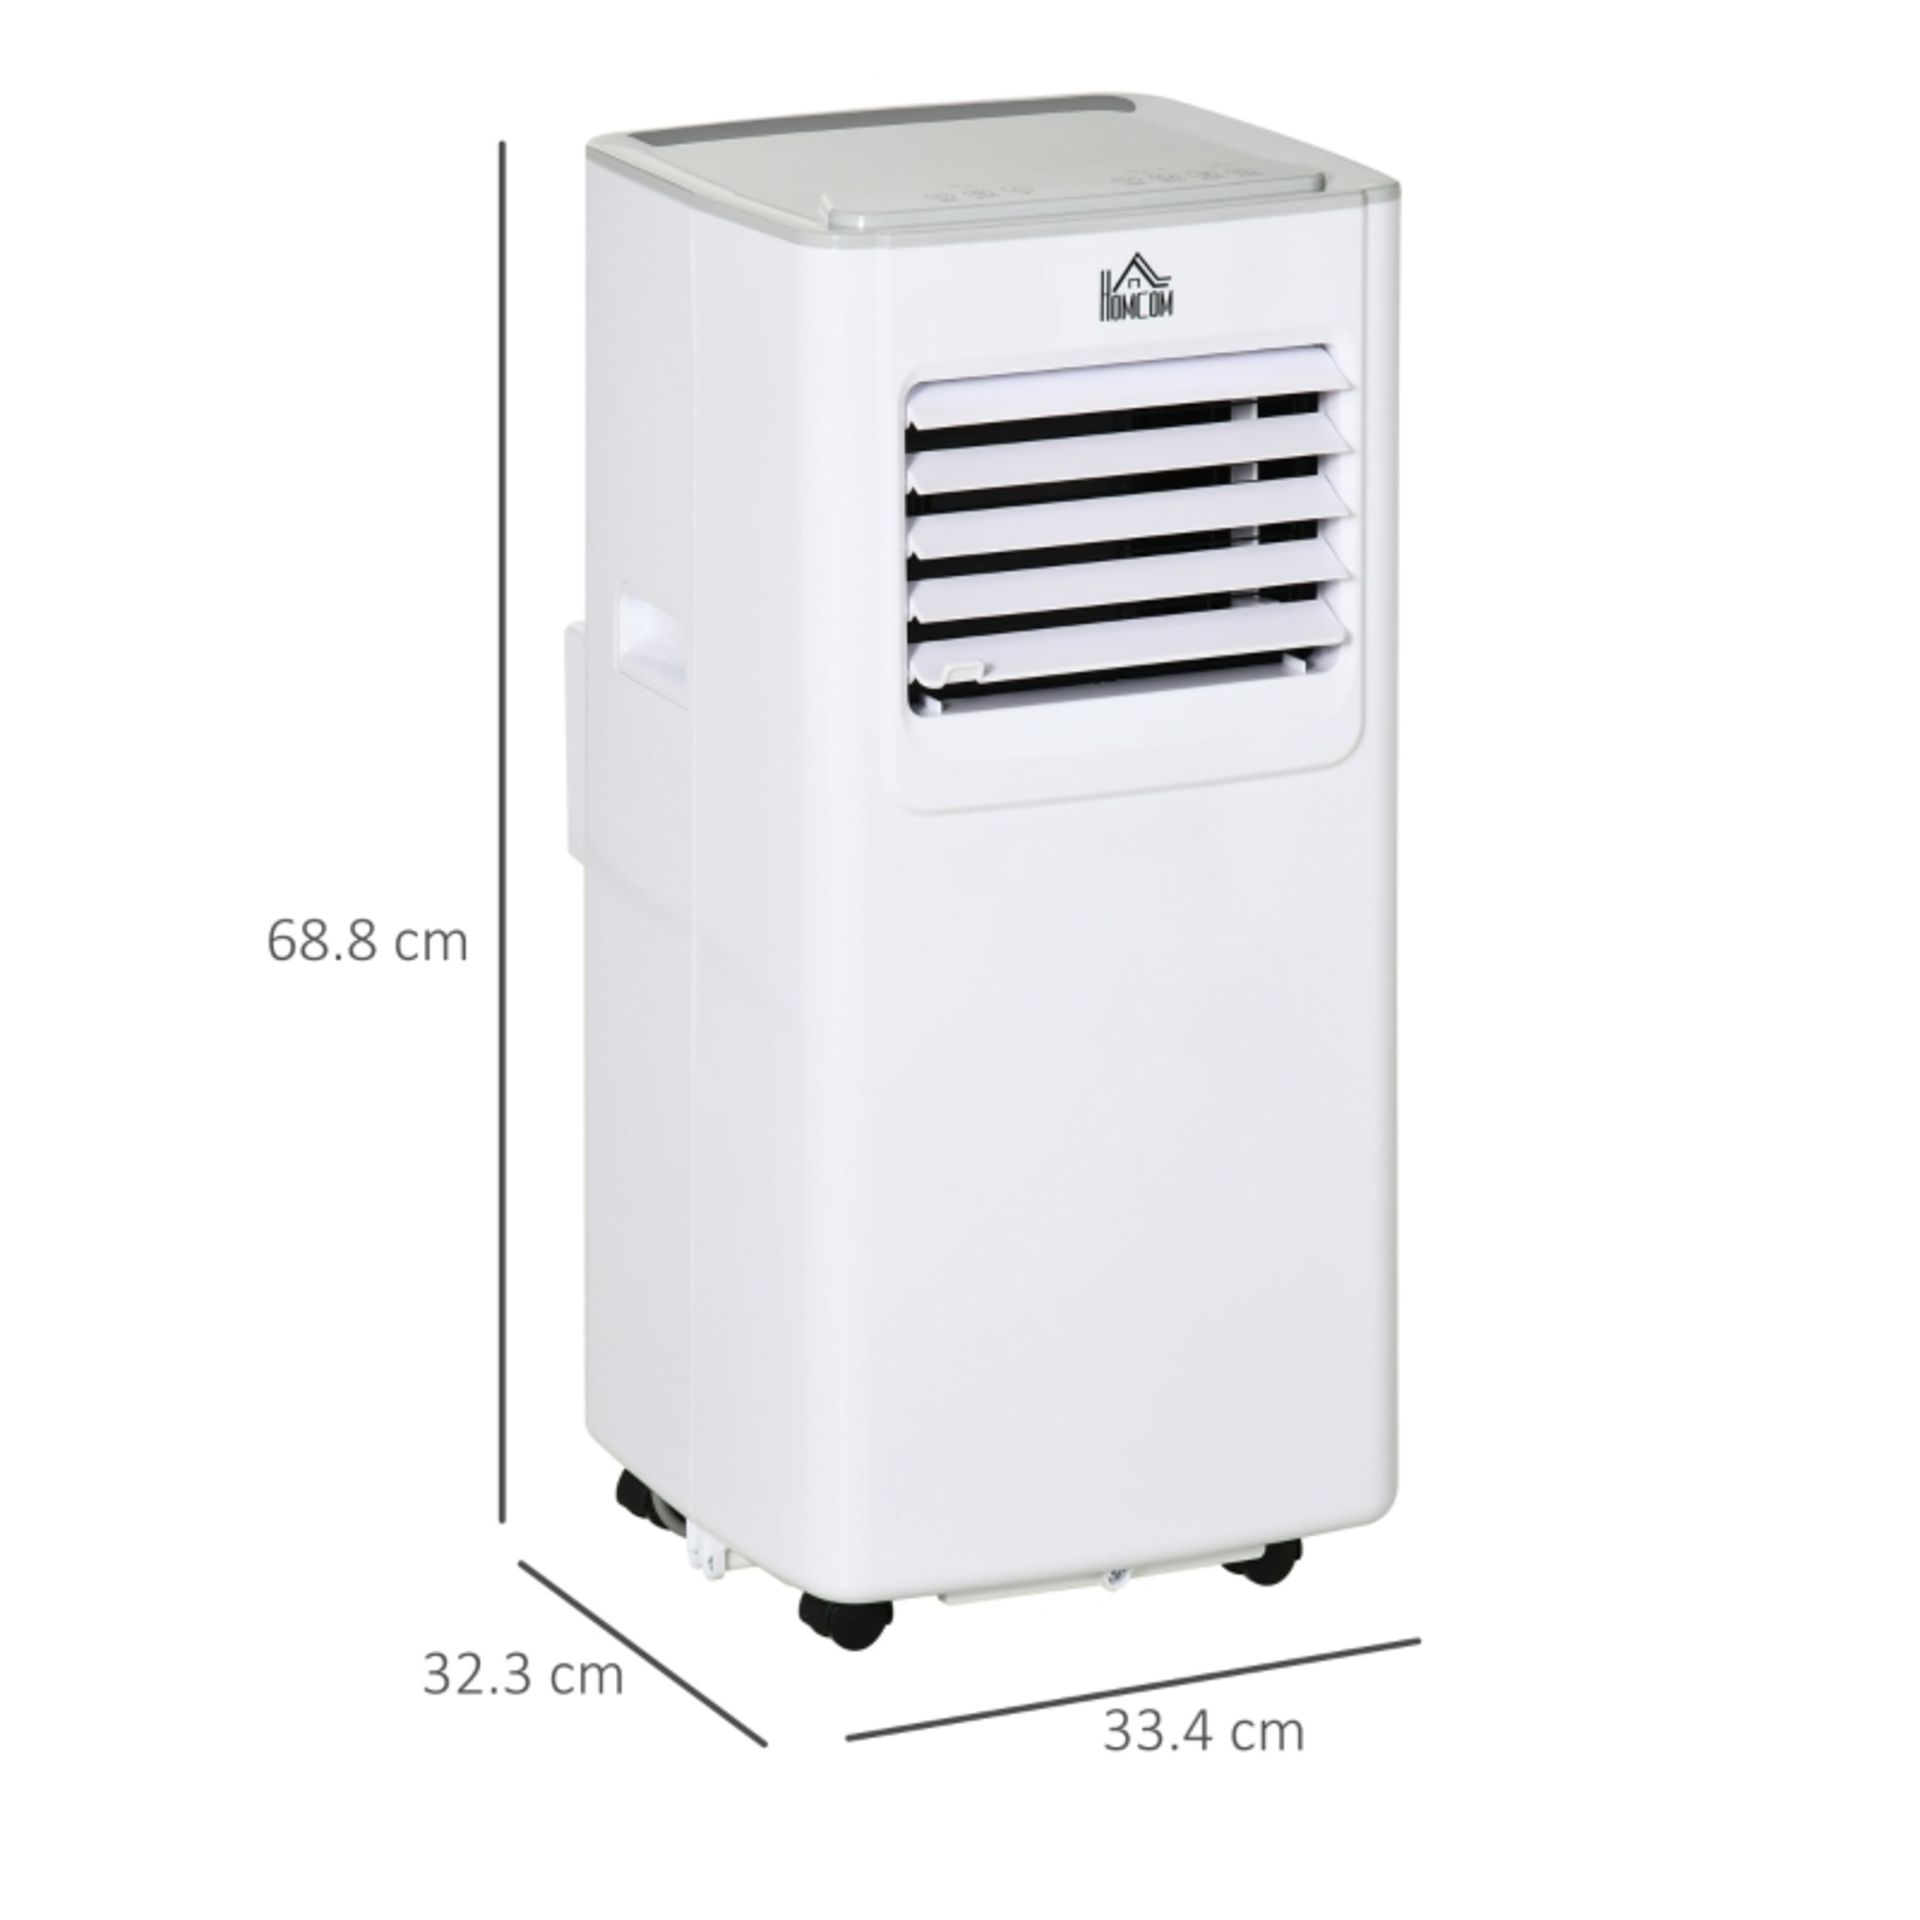 RPP £309.99 -HOMCOM 4-In-1 7000 BTU Mobile Air Conditioner for Room up to 15m², Portable AC Unit for - Image 3 of 4